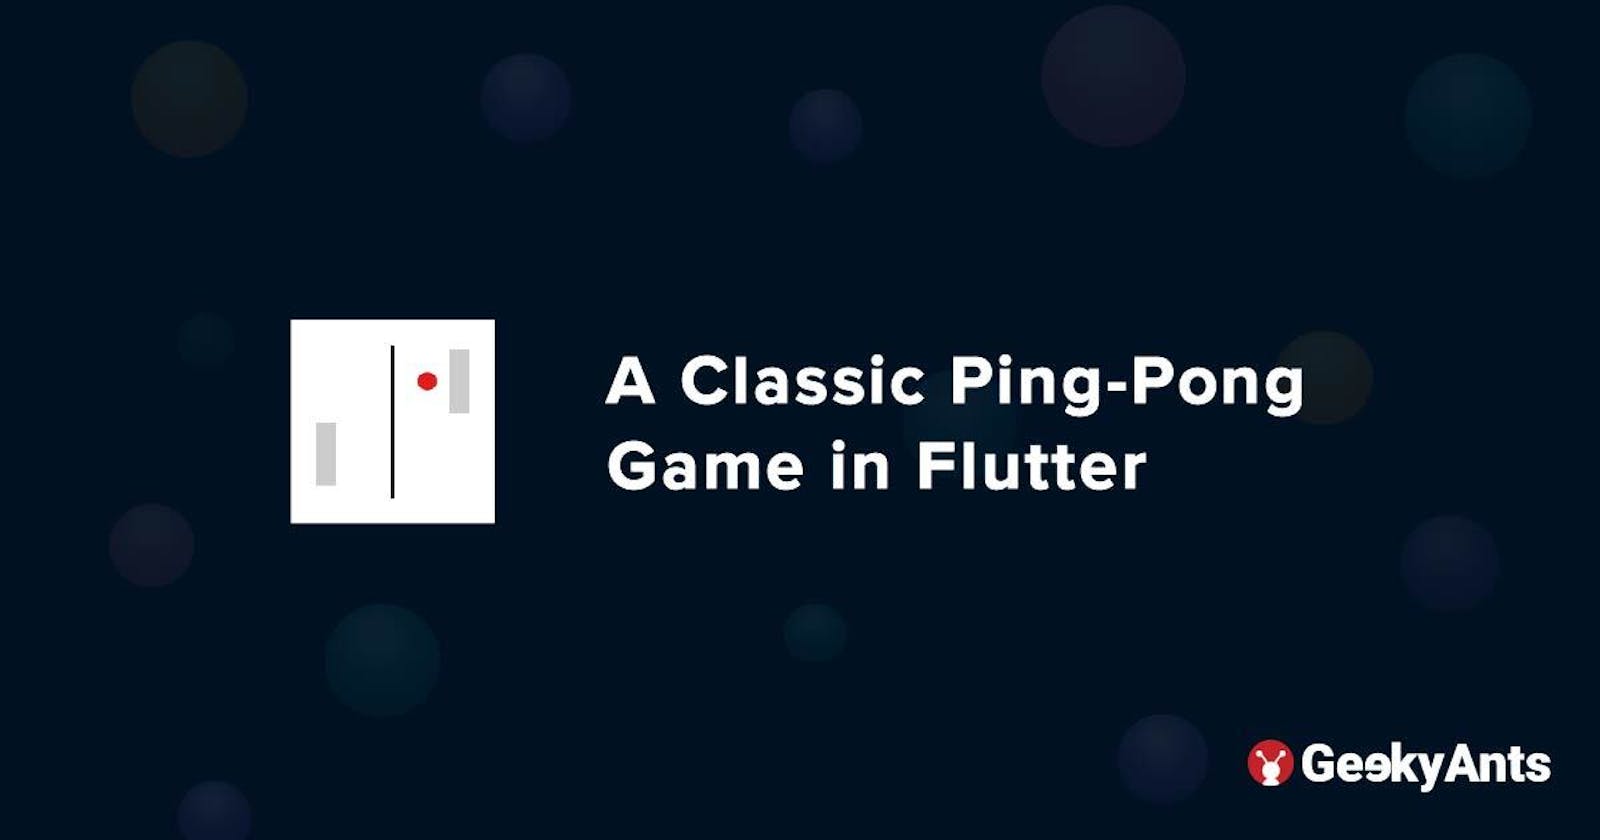 A Classic Ping-Pong Game in Flutter